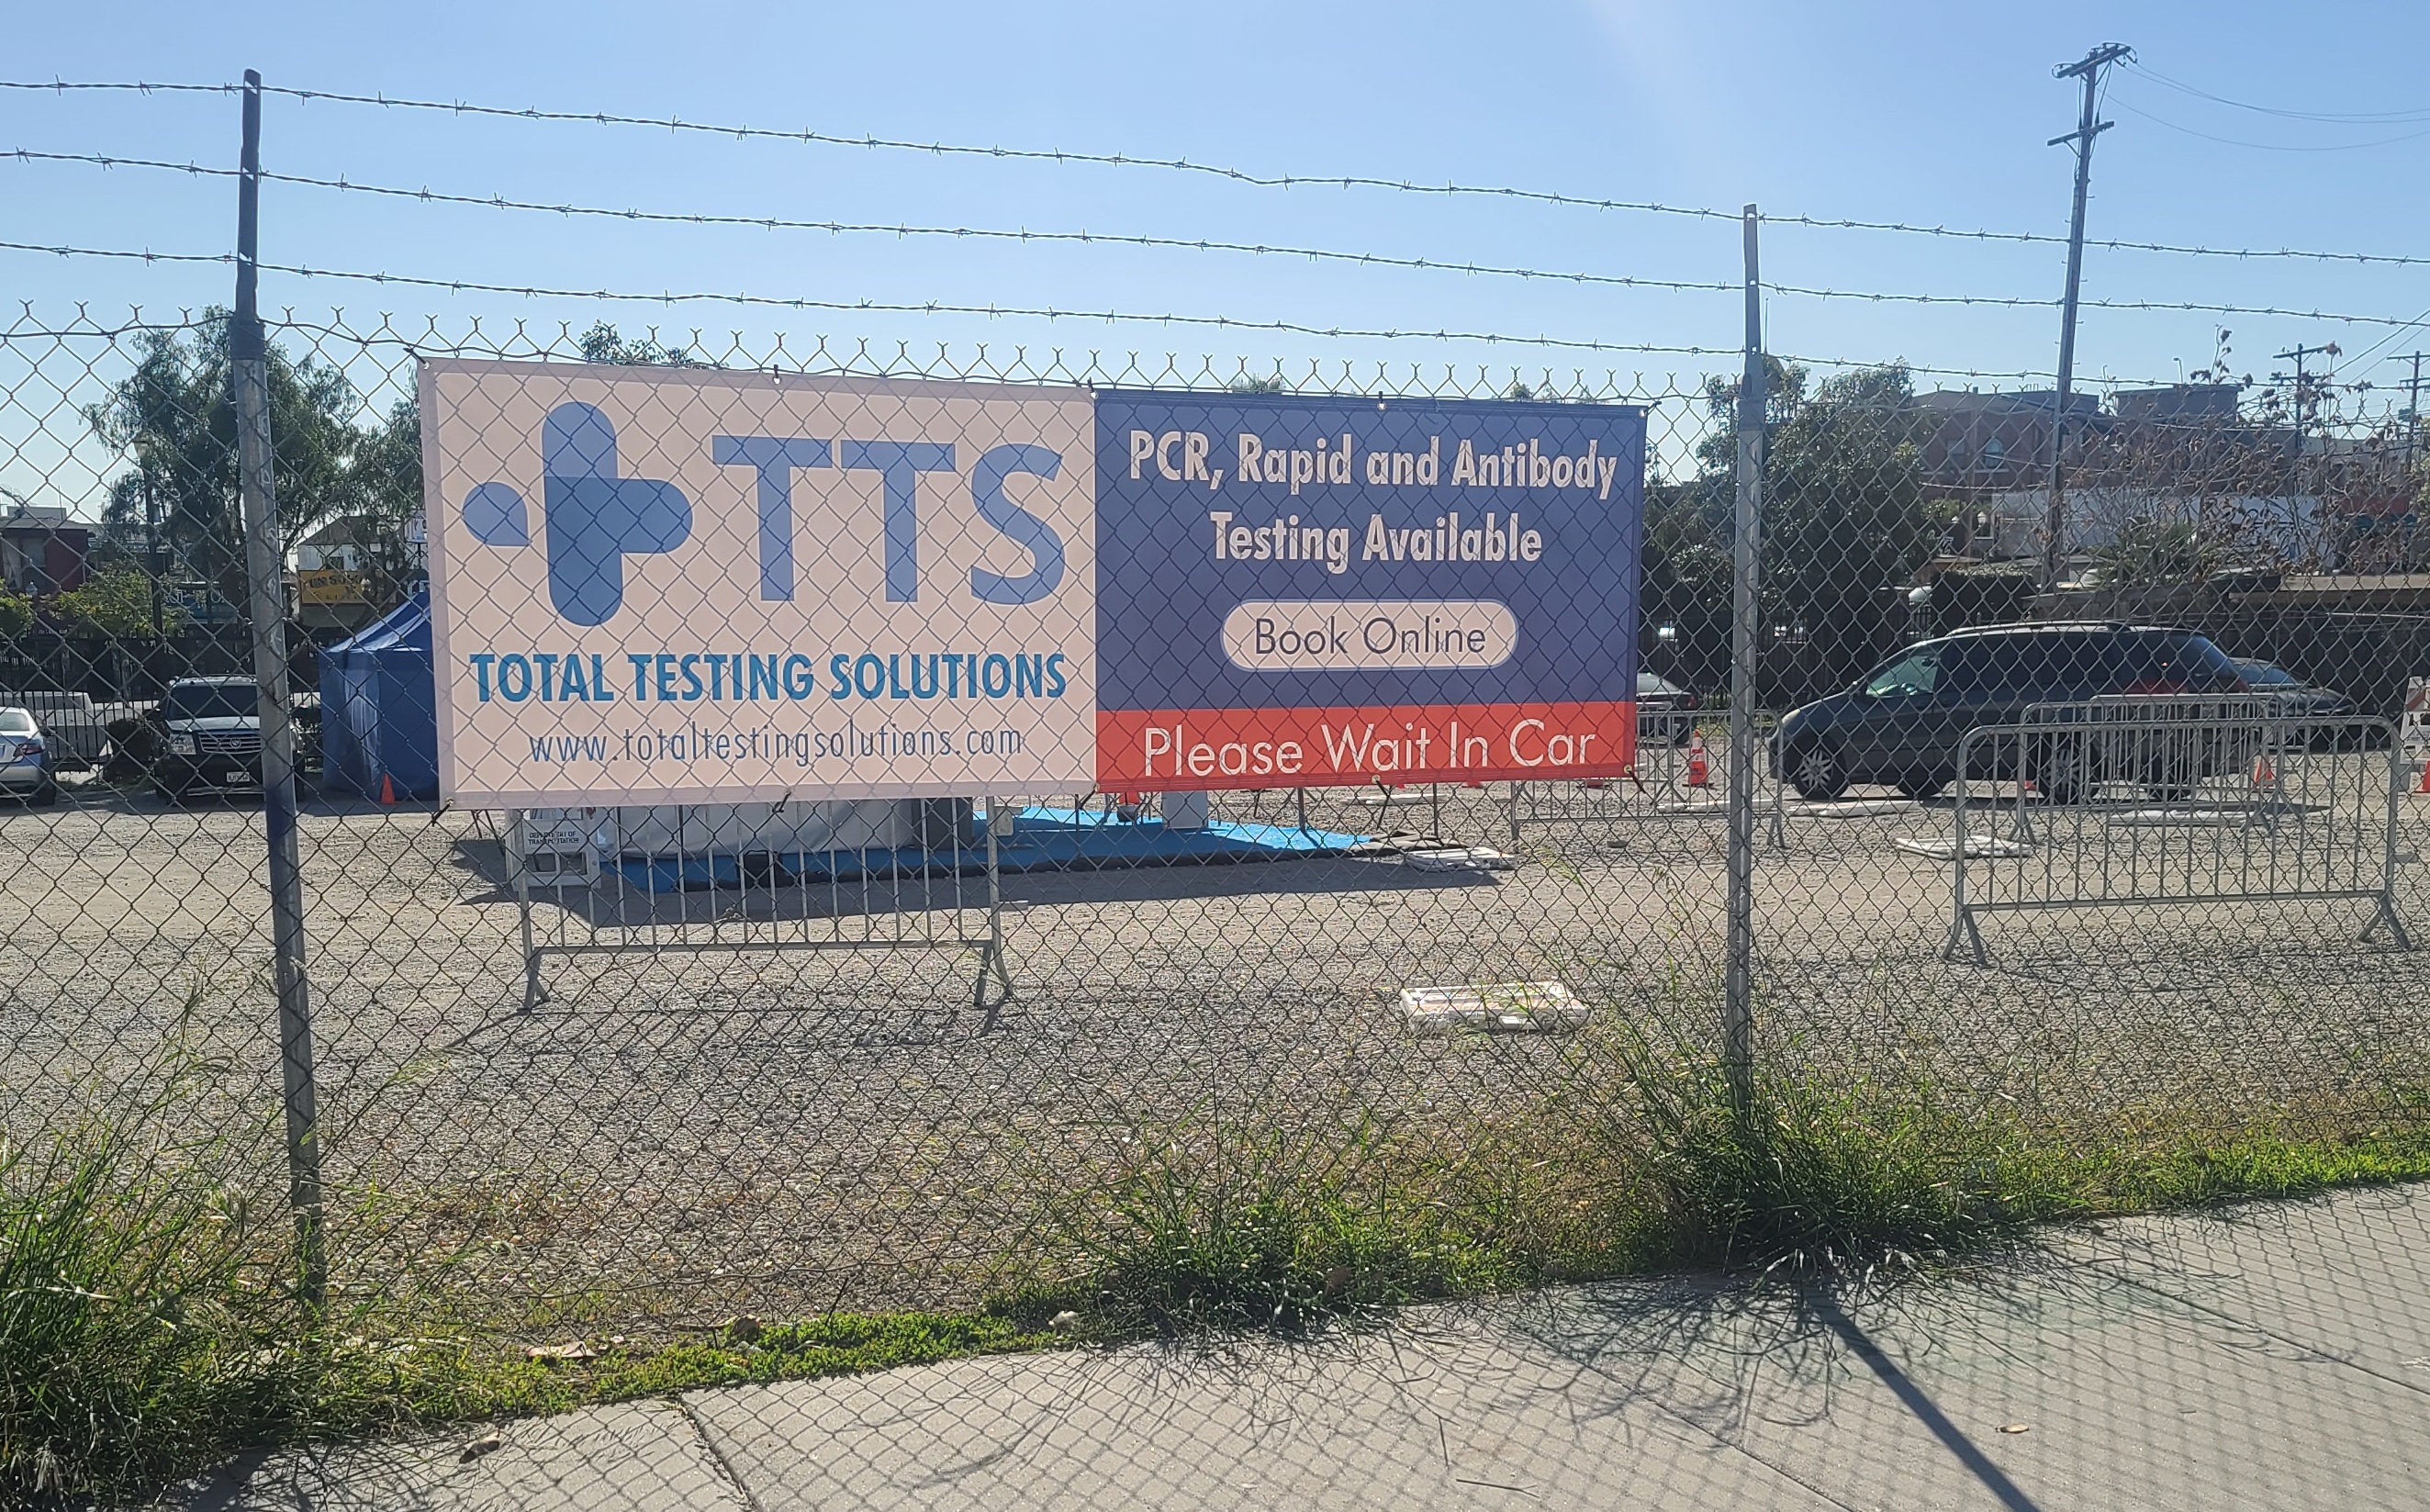 Here are two smaller custom banners for Total Testing Solutions' downtown Los Angeles location. These are part of the extensive sign package.